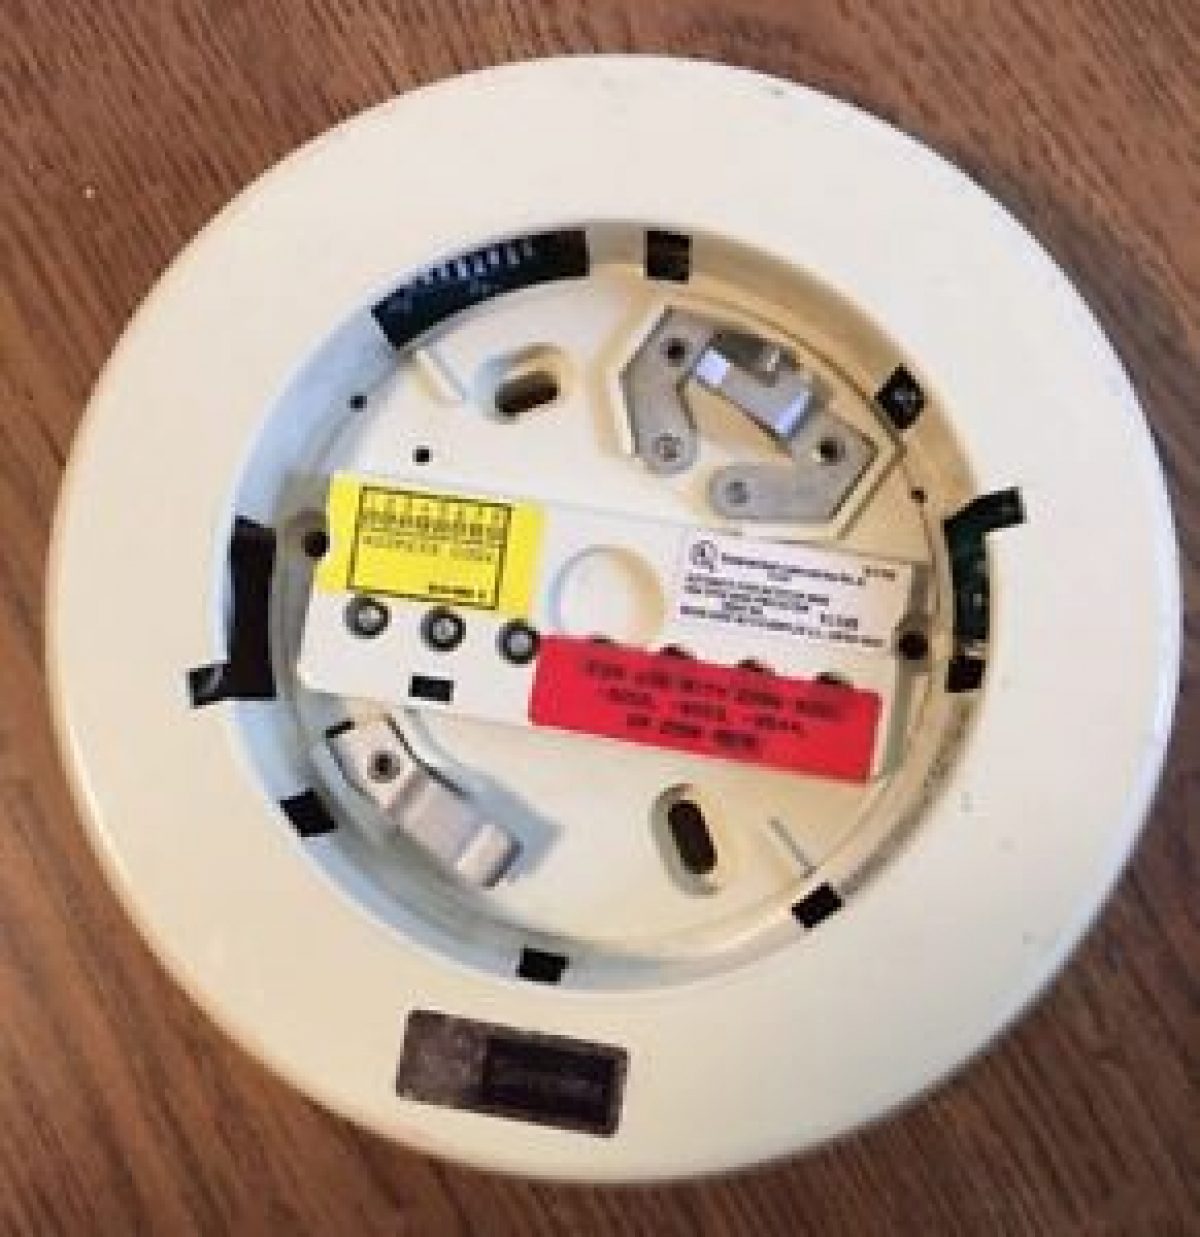 Simplex (2098-9201) Reconditioned Photoelectric Smoke Detector